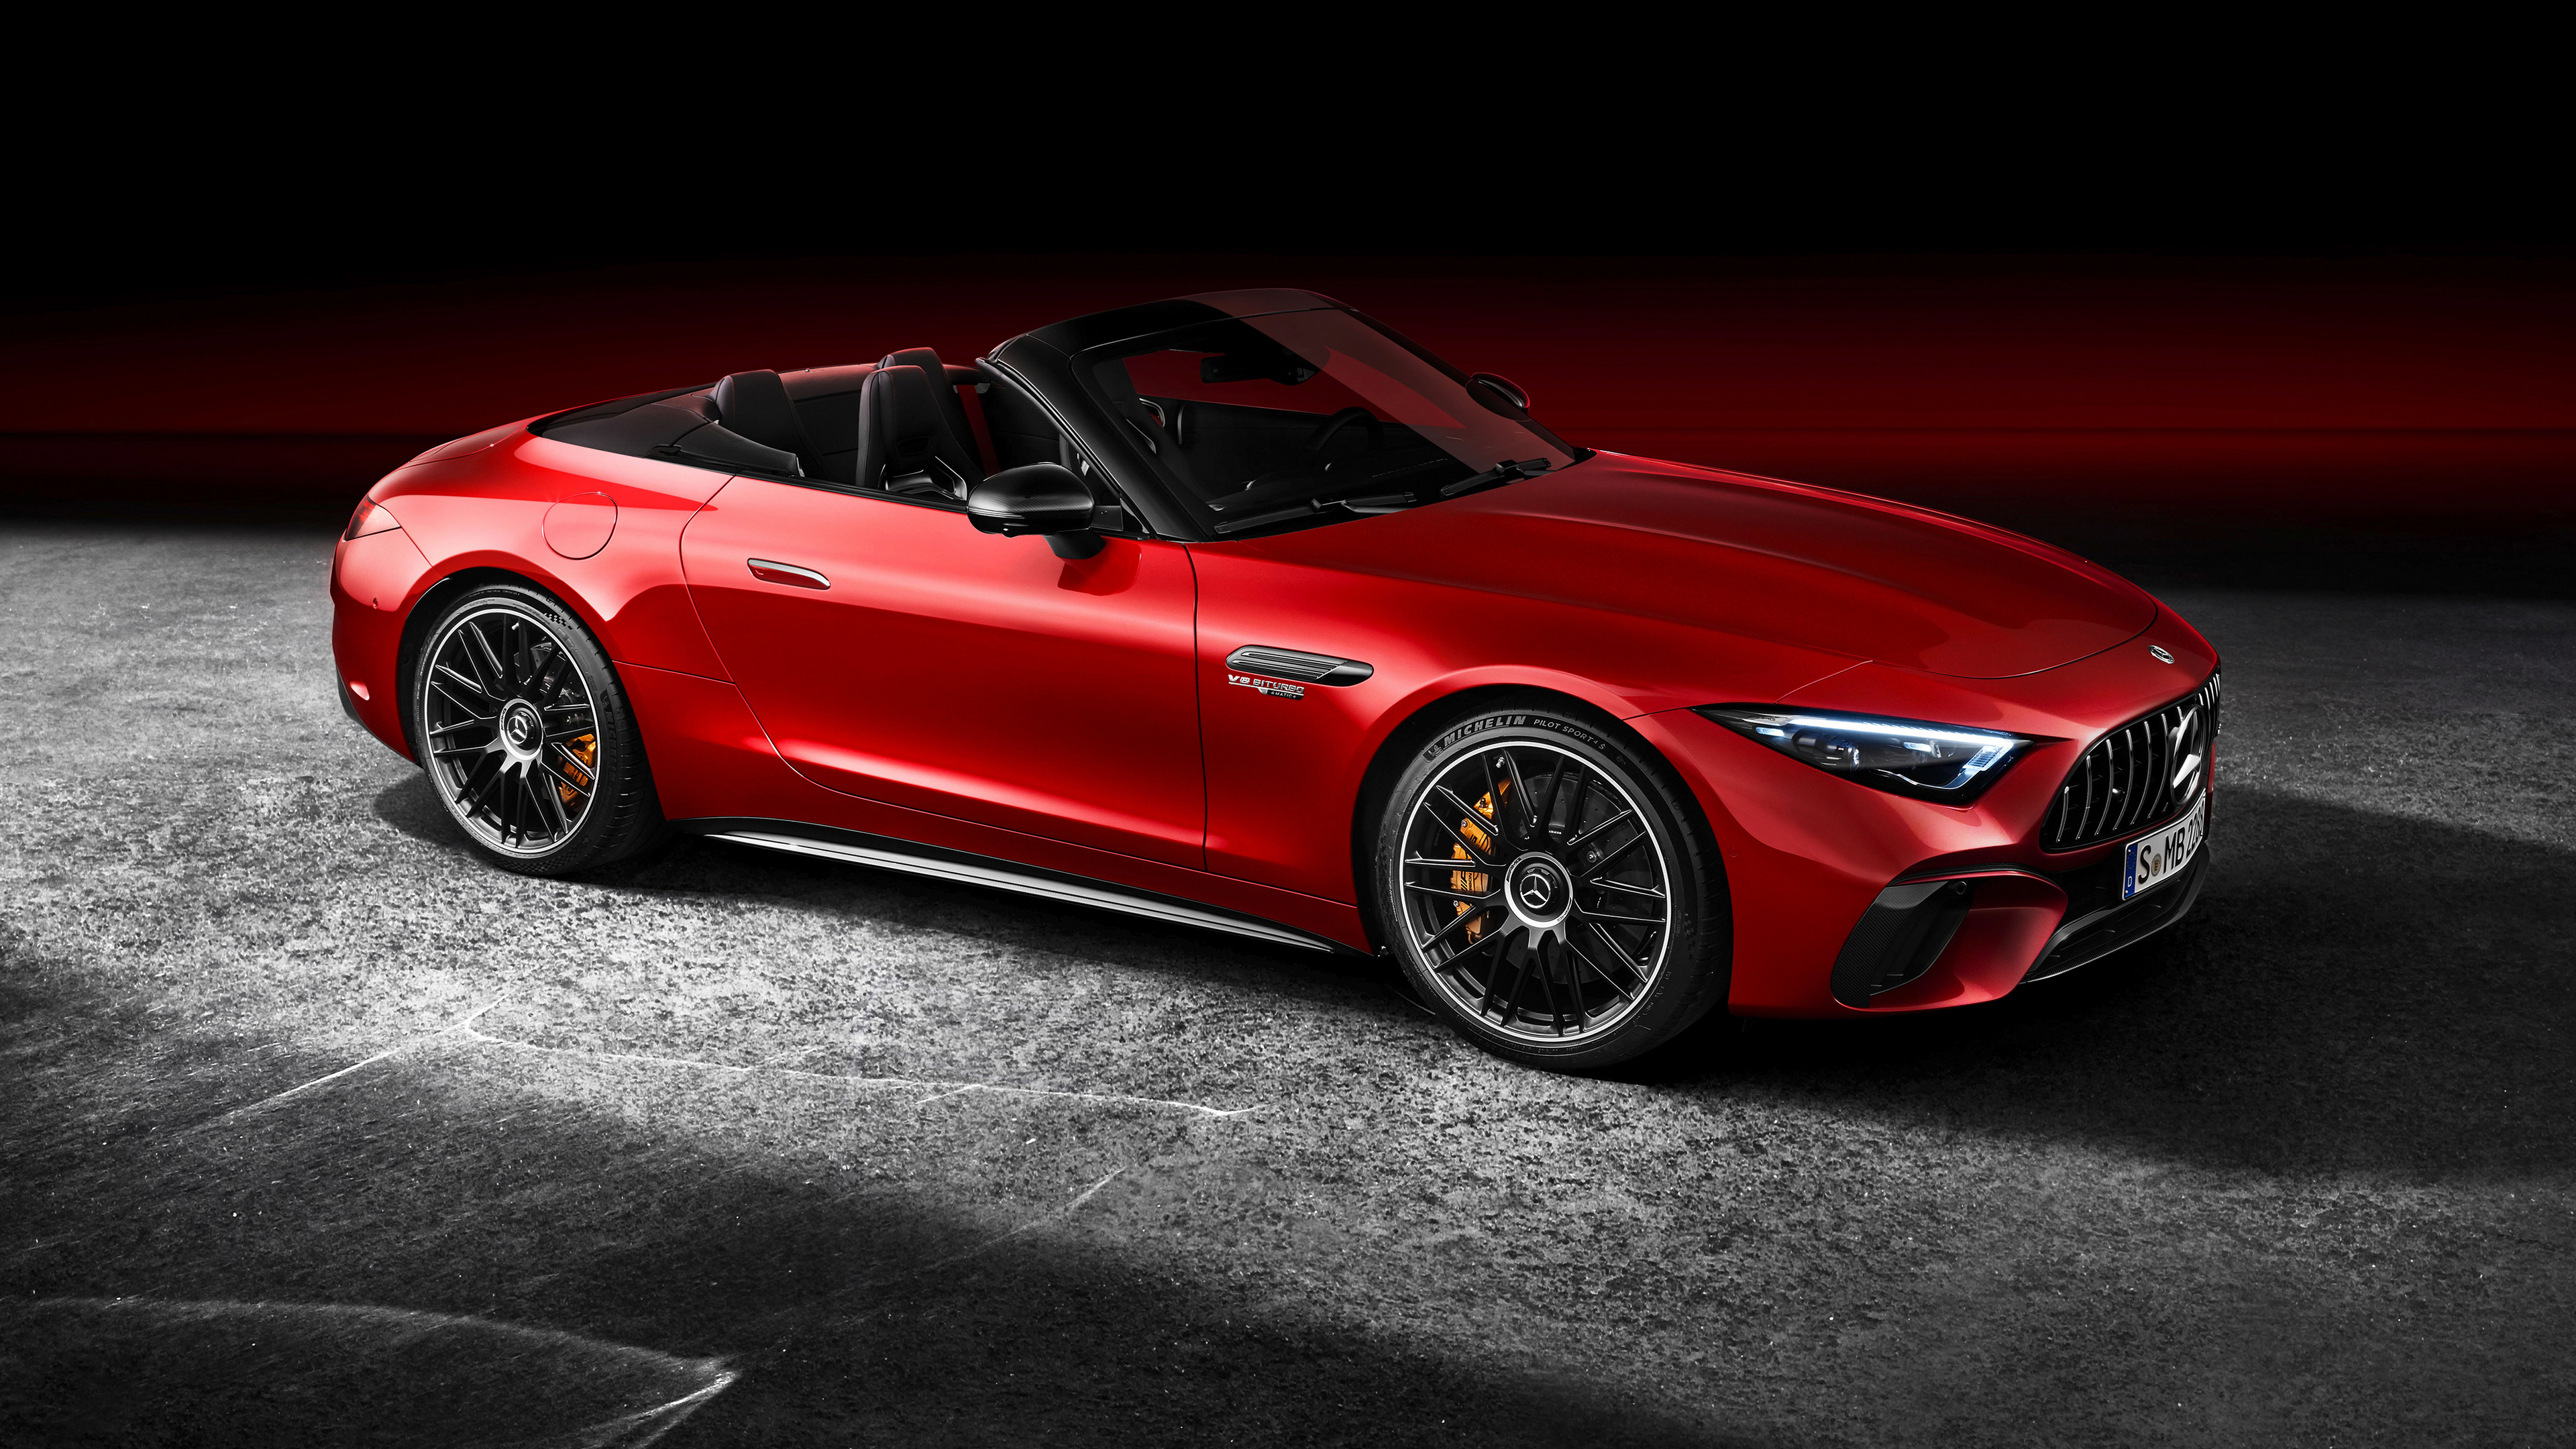 Mercedes-amg sl 63 convertible 2022 in beautiful red